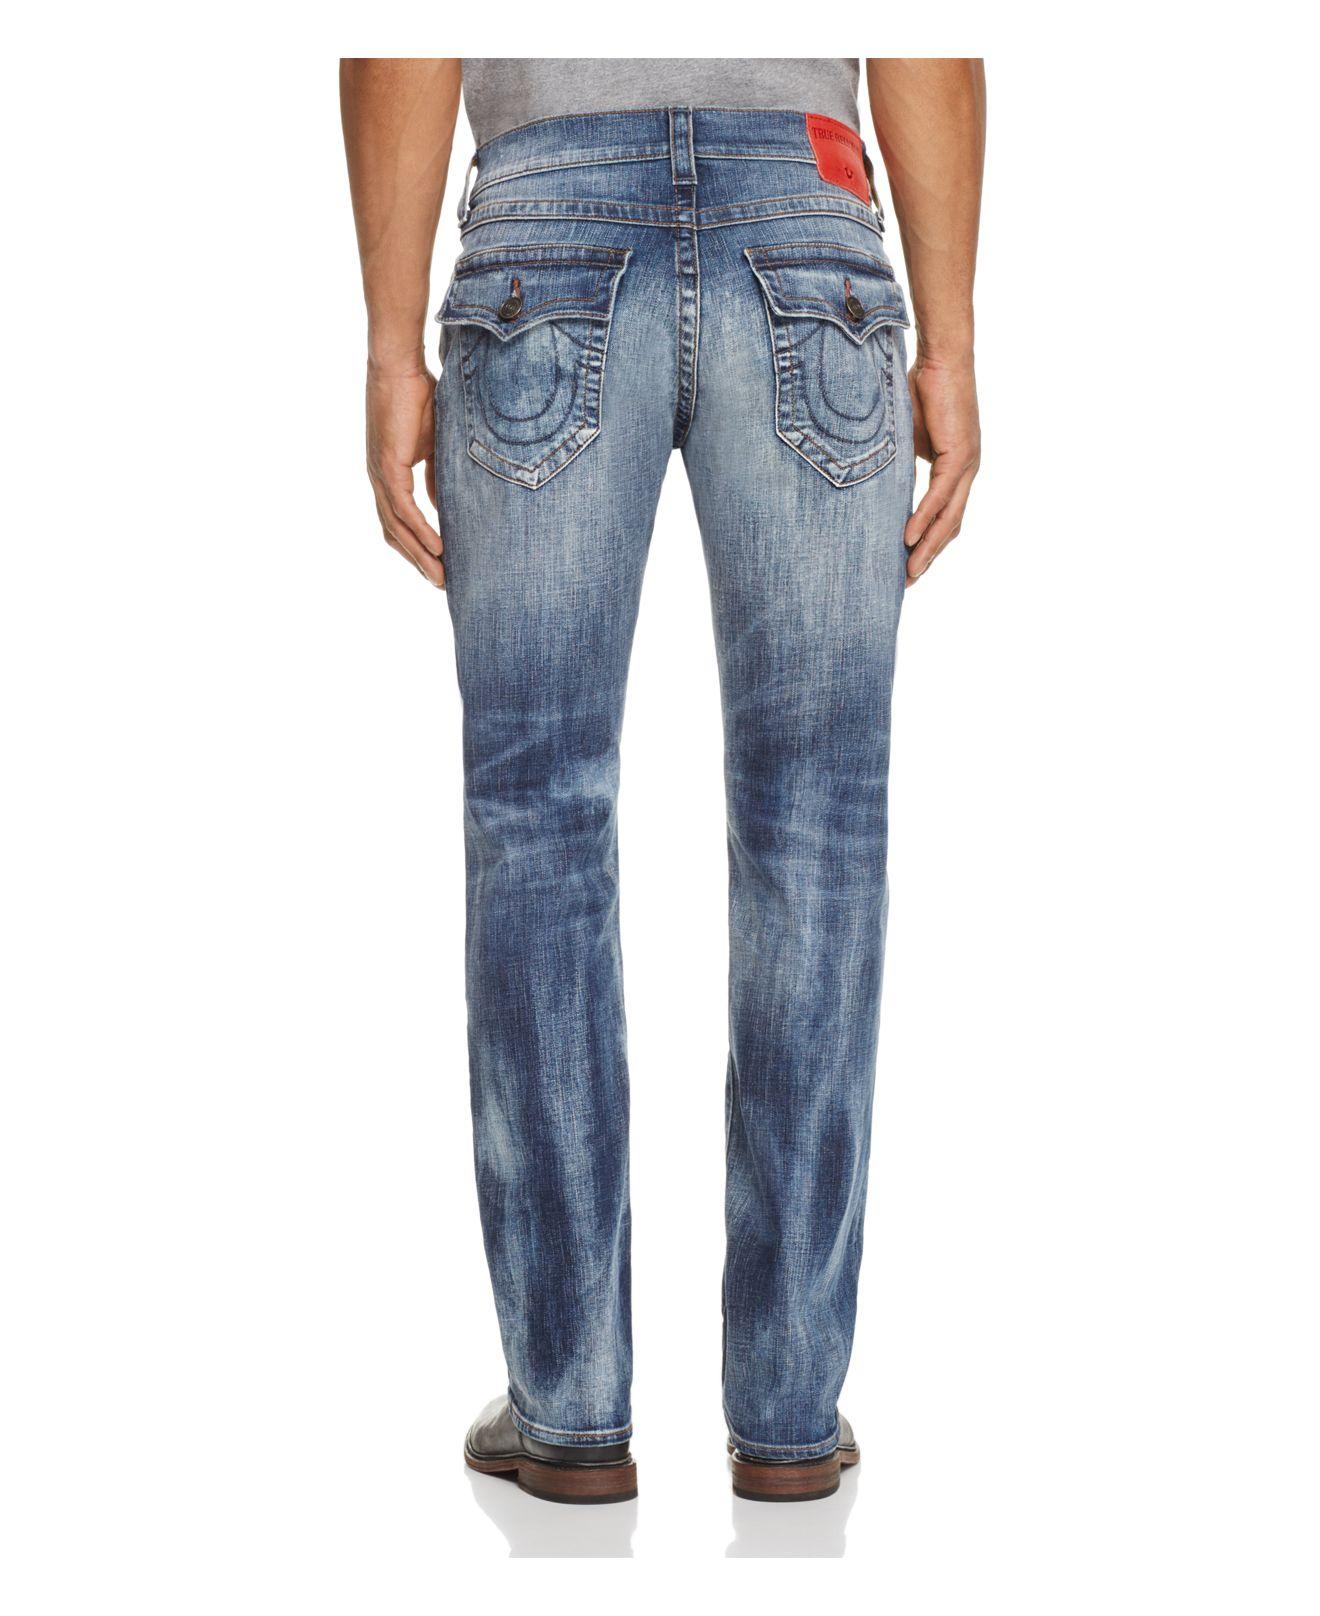 True Religion Ricky Straight Fit Jeans In Cape Town in Blue for Men - Lyst